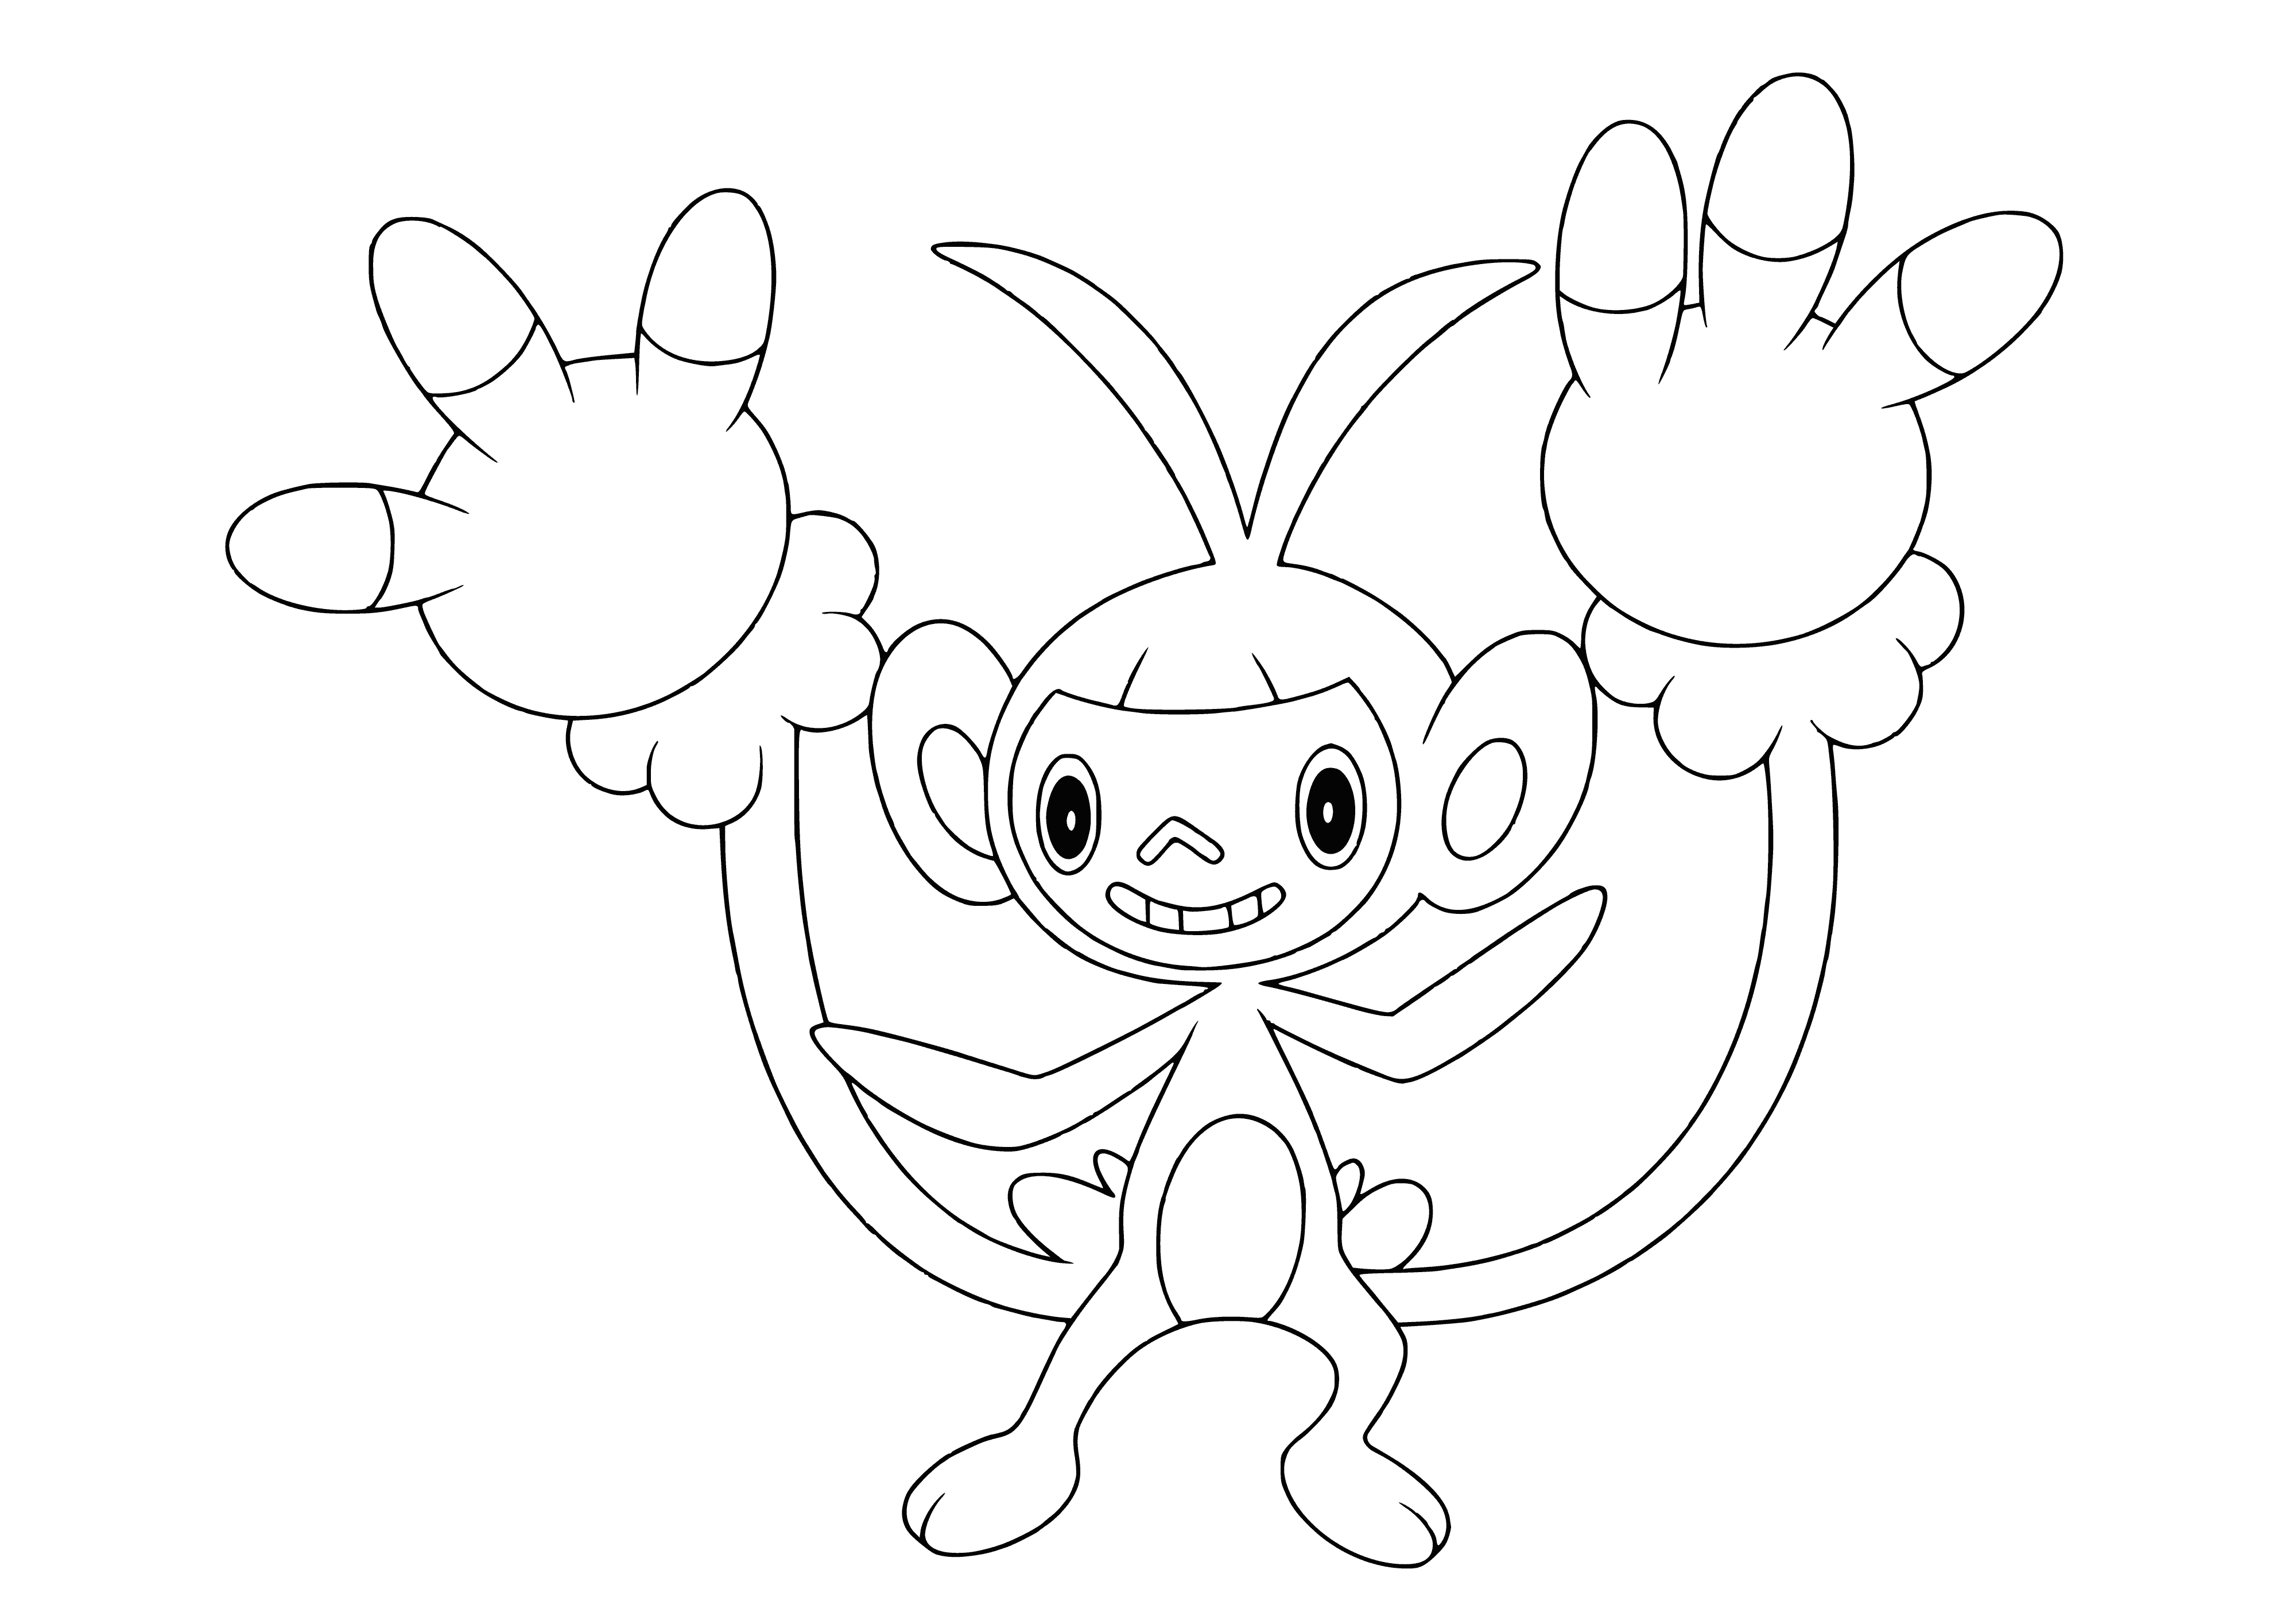 coloring page: Ambipom: Reddish-brown monkey Pokémon with large ears, small nose, furry tufts, 3 digits on hands/feet, prehensile tail tipped by blue bead. E. from Aipom with Sinnoh Stone.